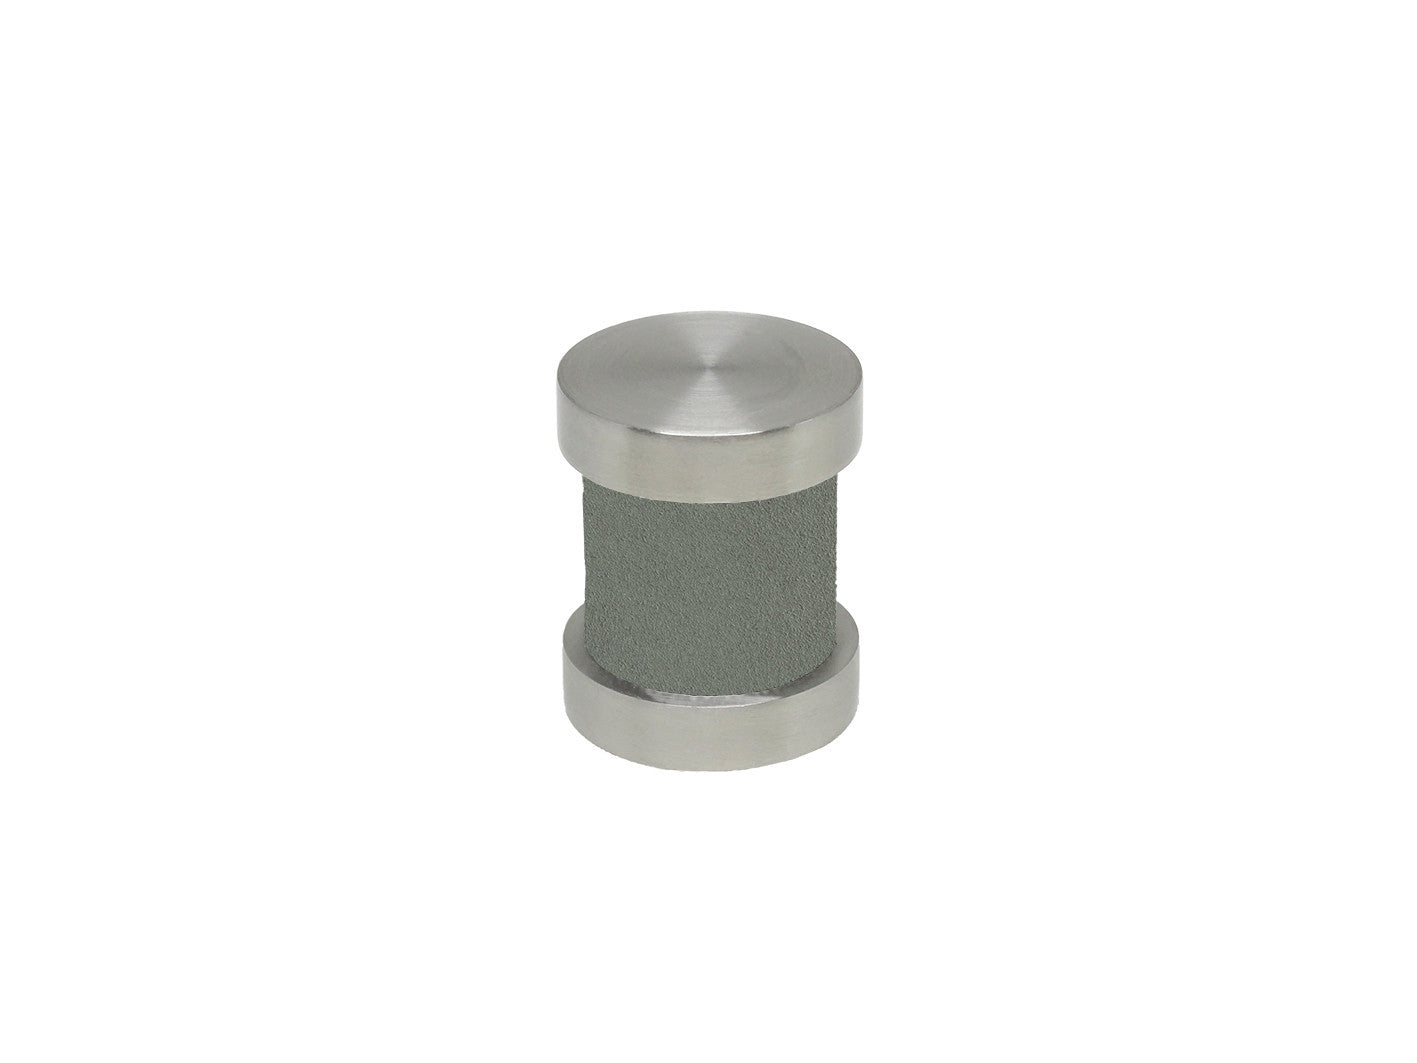 Slate grey groove finial | Walcot House 30mm stainless steel collection